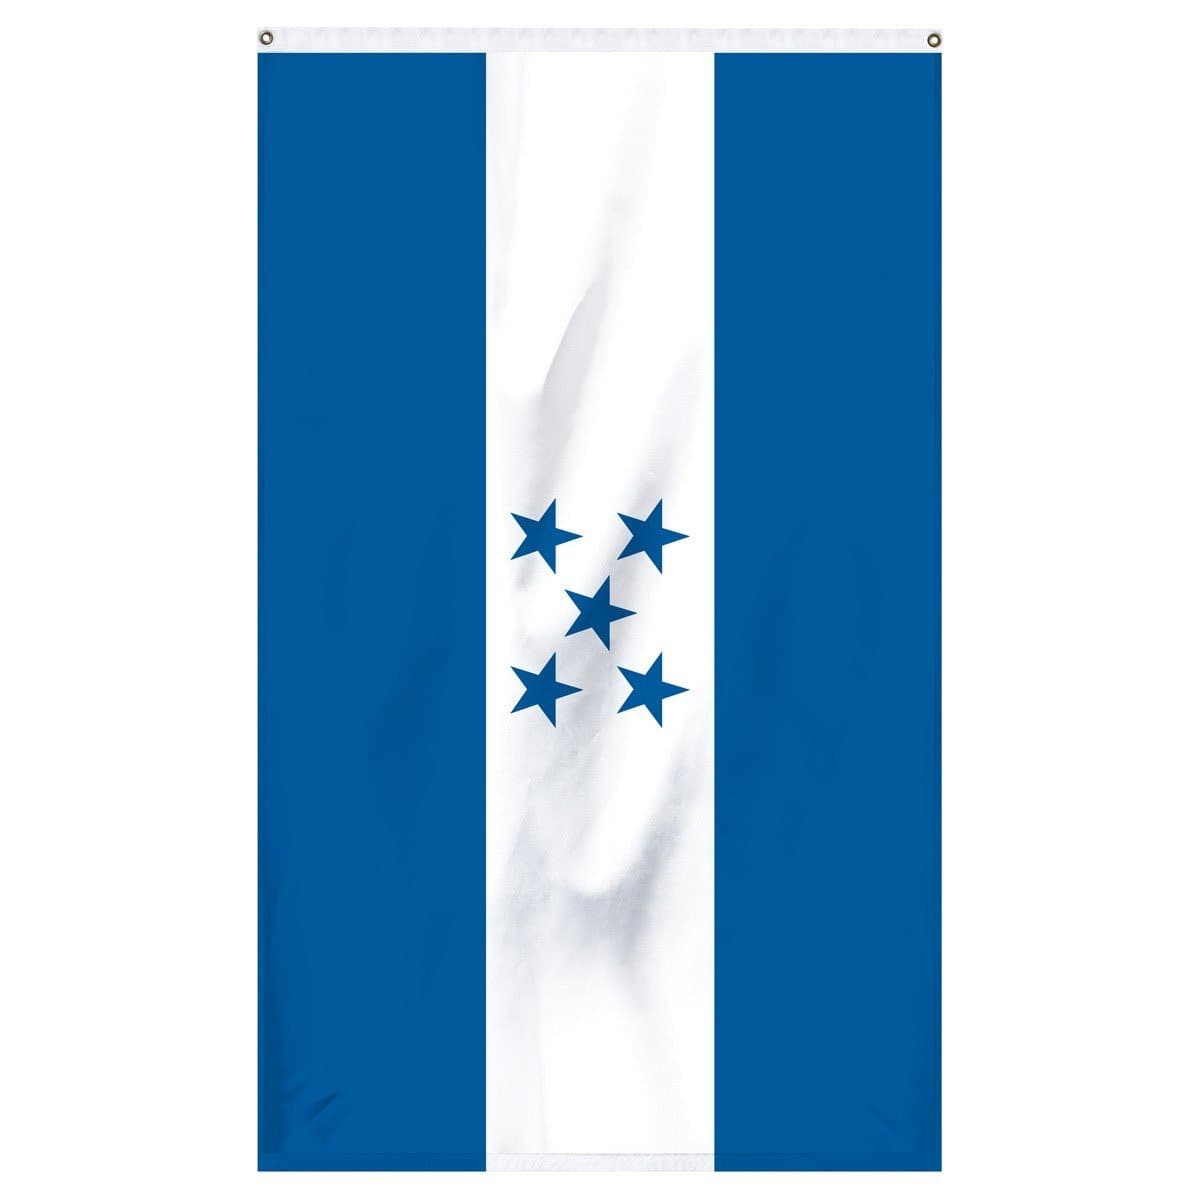 The flag of Honduras for sale to buy online now